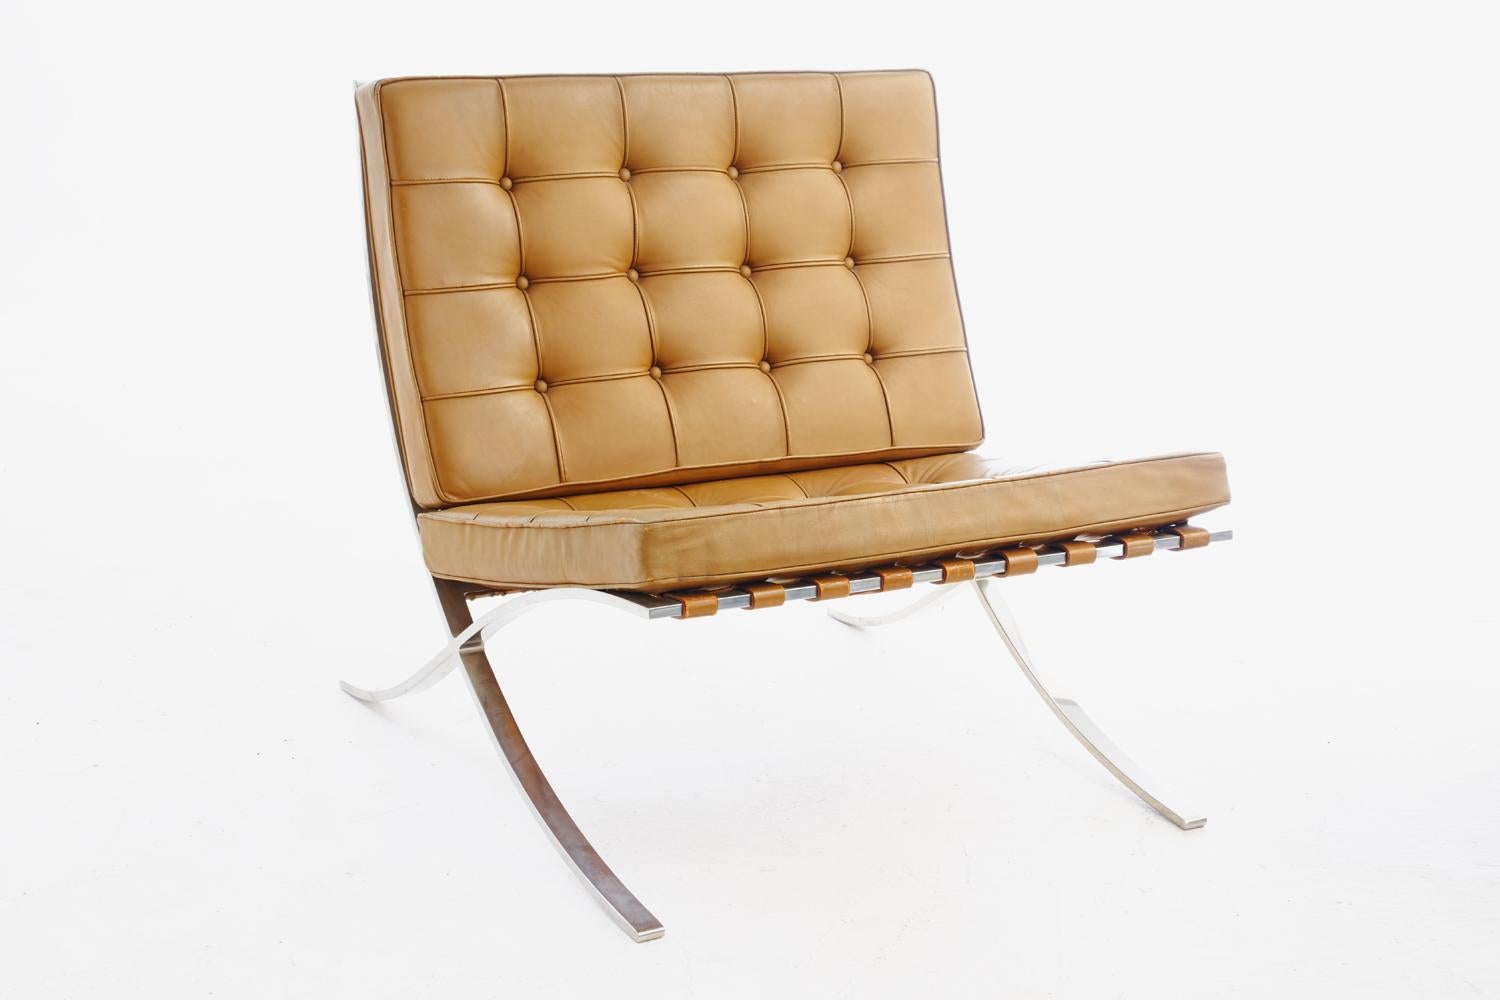 Stunning pair of Barcelona chairs manufactured by Knoll, 1960s designed by Mies van der Rohe, Classic design, original hand-sewn tan leather seat and back cushions, wonderful patina, retain original early Knoll Associates label.Hand delivery avail